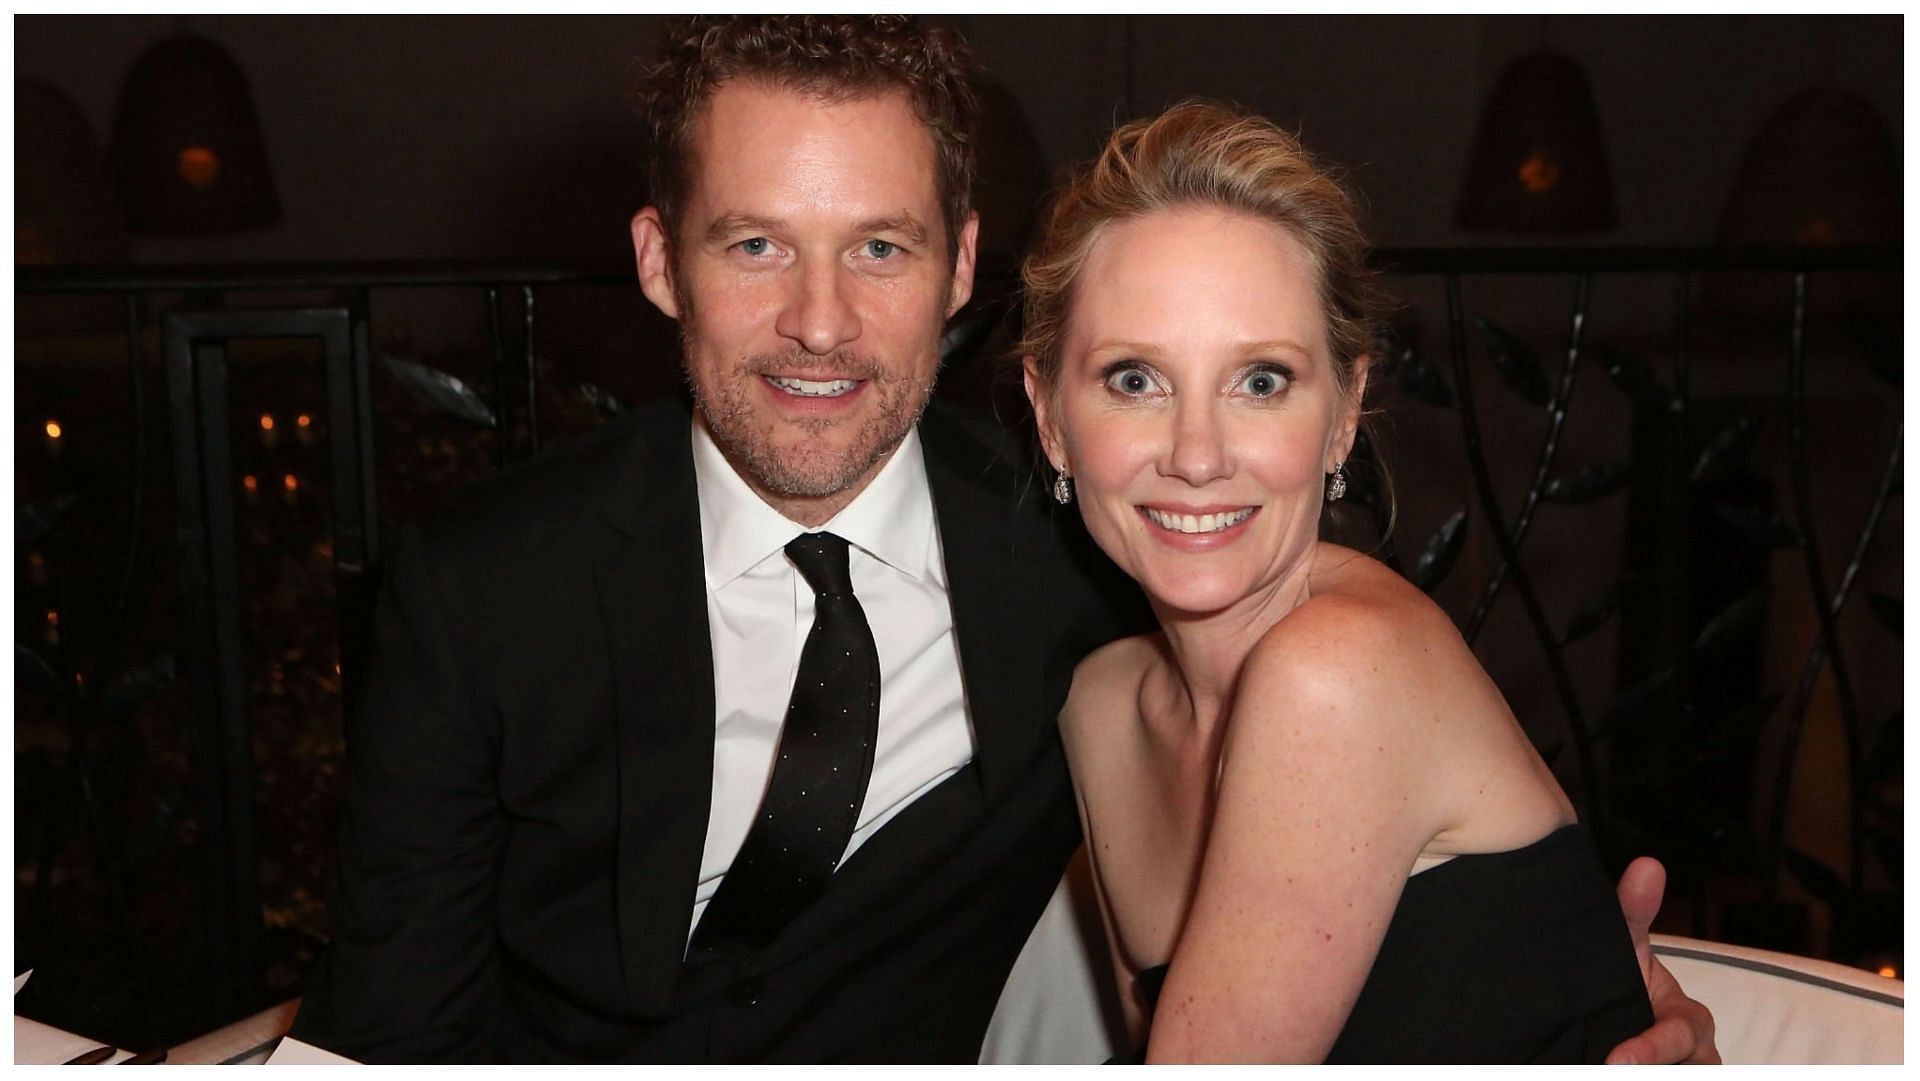 James Tupper says that Anne Heche chose him to look over her estate (Image via Ari Perilstein/Getty Images)